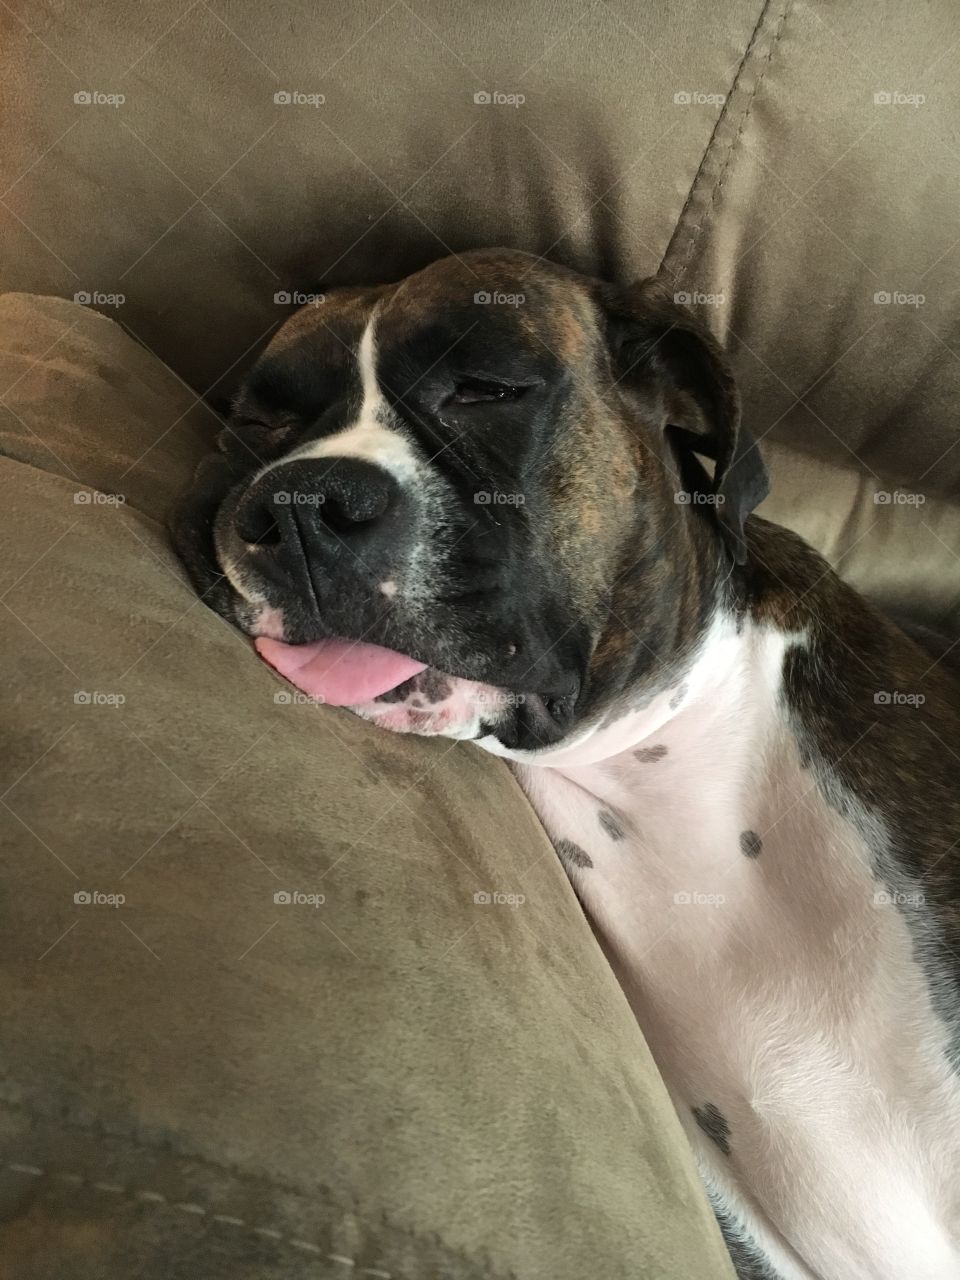 Maya sleeps with her tongue out